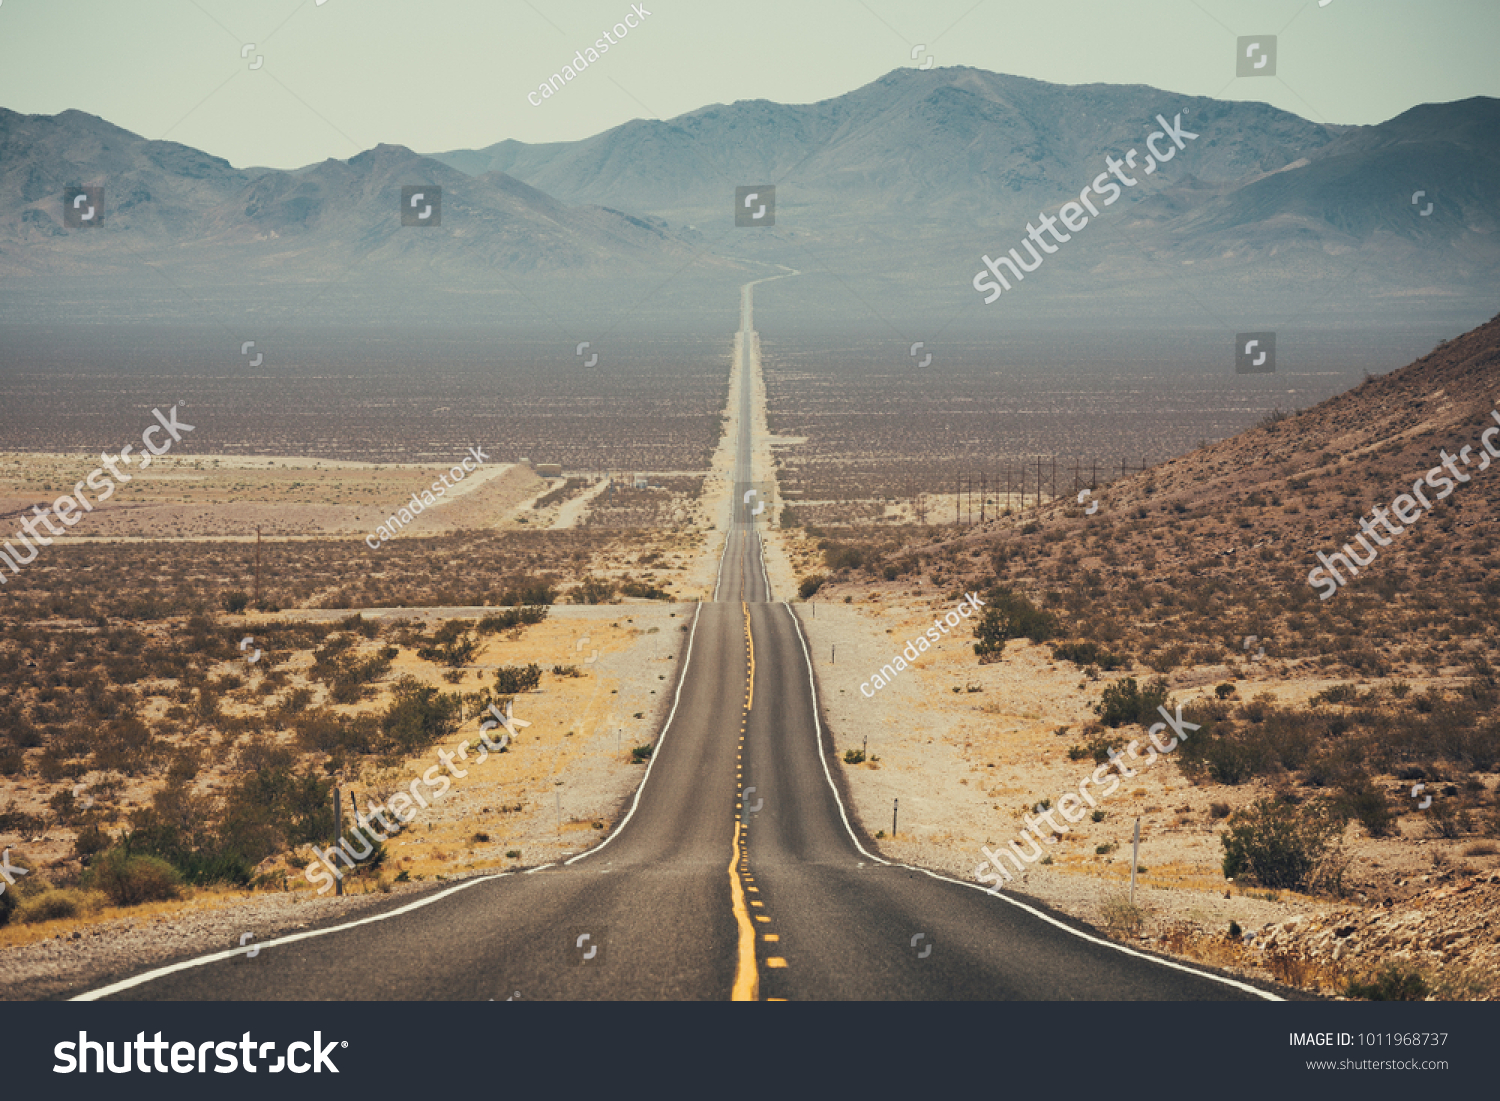 Classic panorama view of an endless straight road running through the barren scenery of the American Southwest with extreme heat haze on a beautiful sunny day with blue sky in summer #1011968737